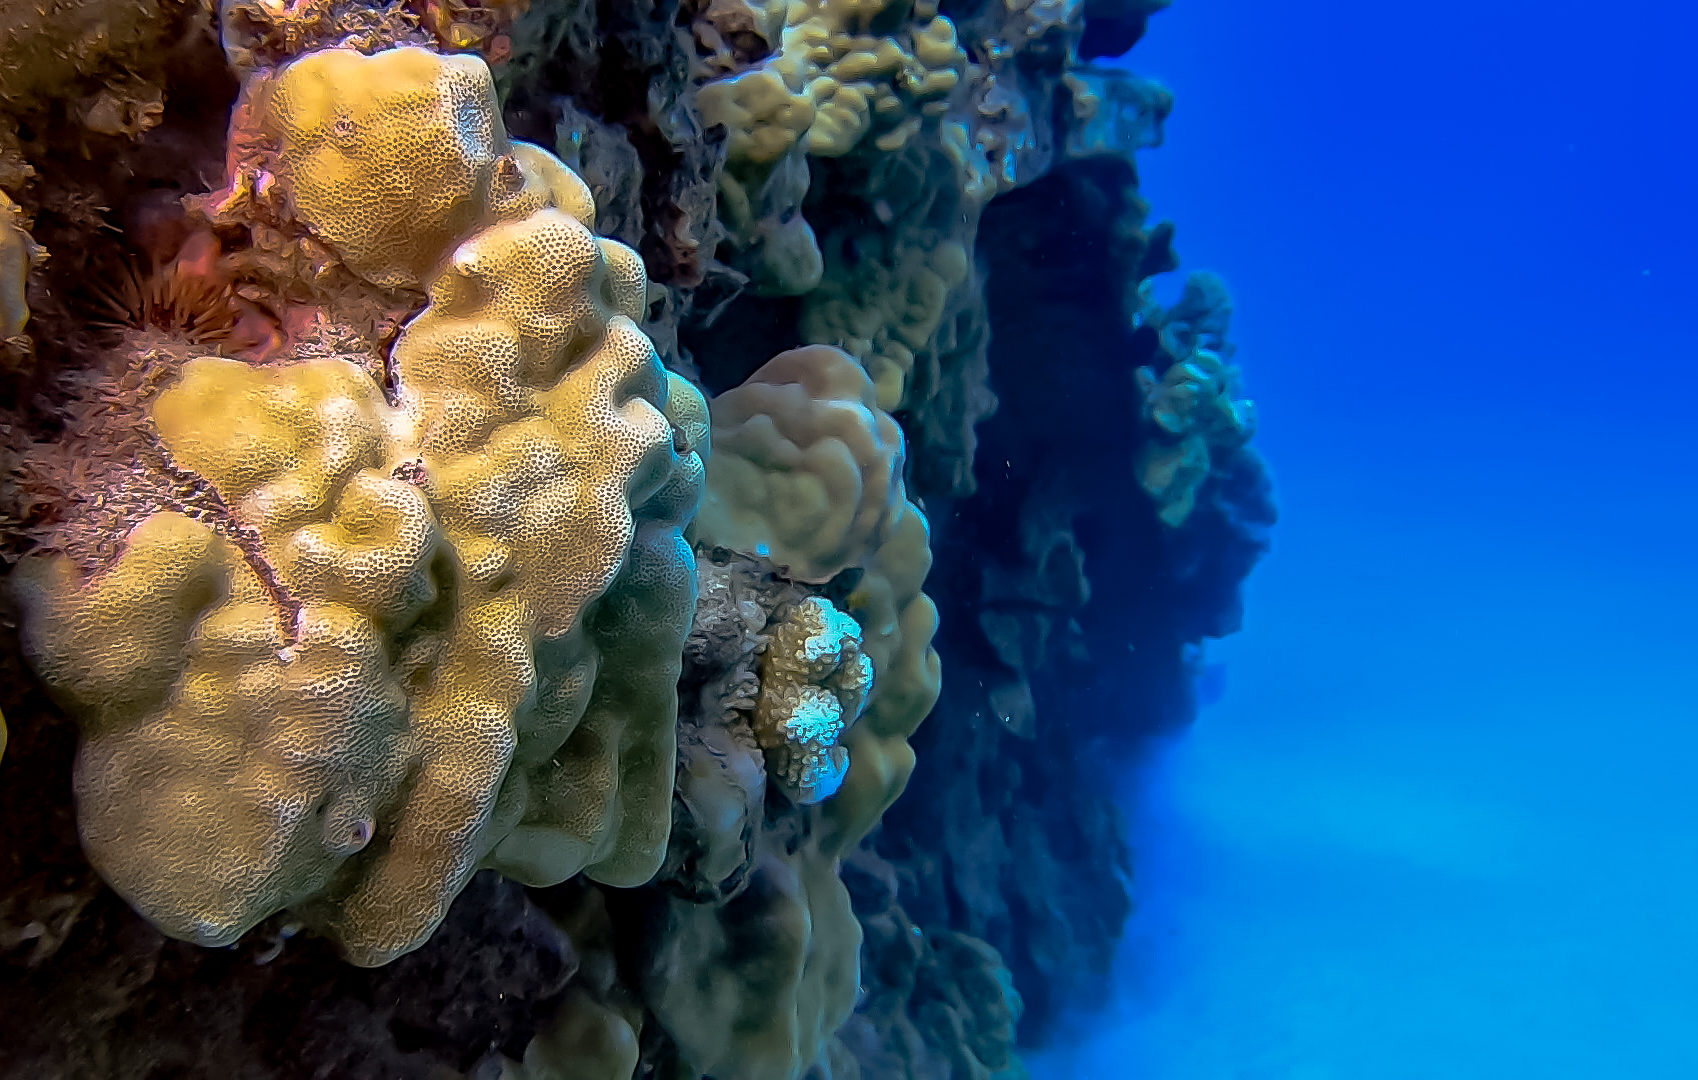 Mounding coral in the waters of Hawai’i